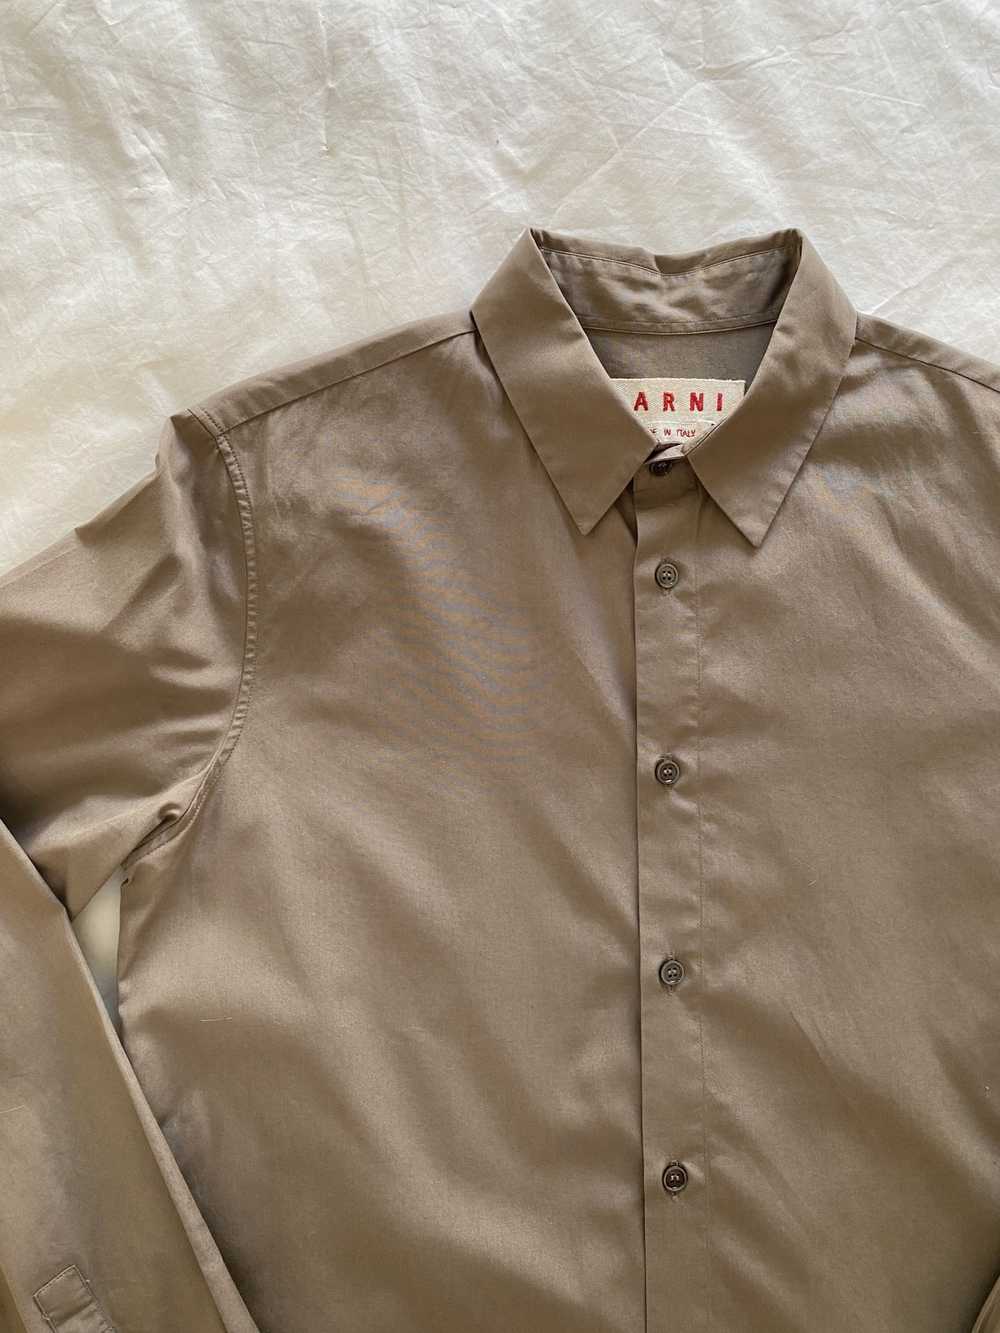 Marni Brown Fitted Dress Shirt - image 6